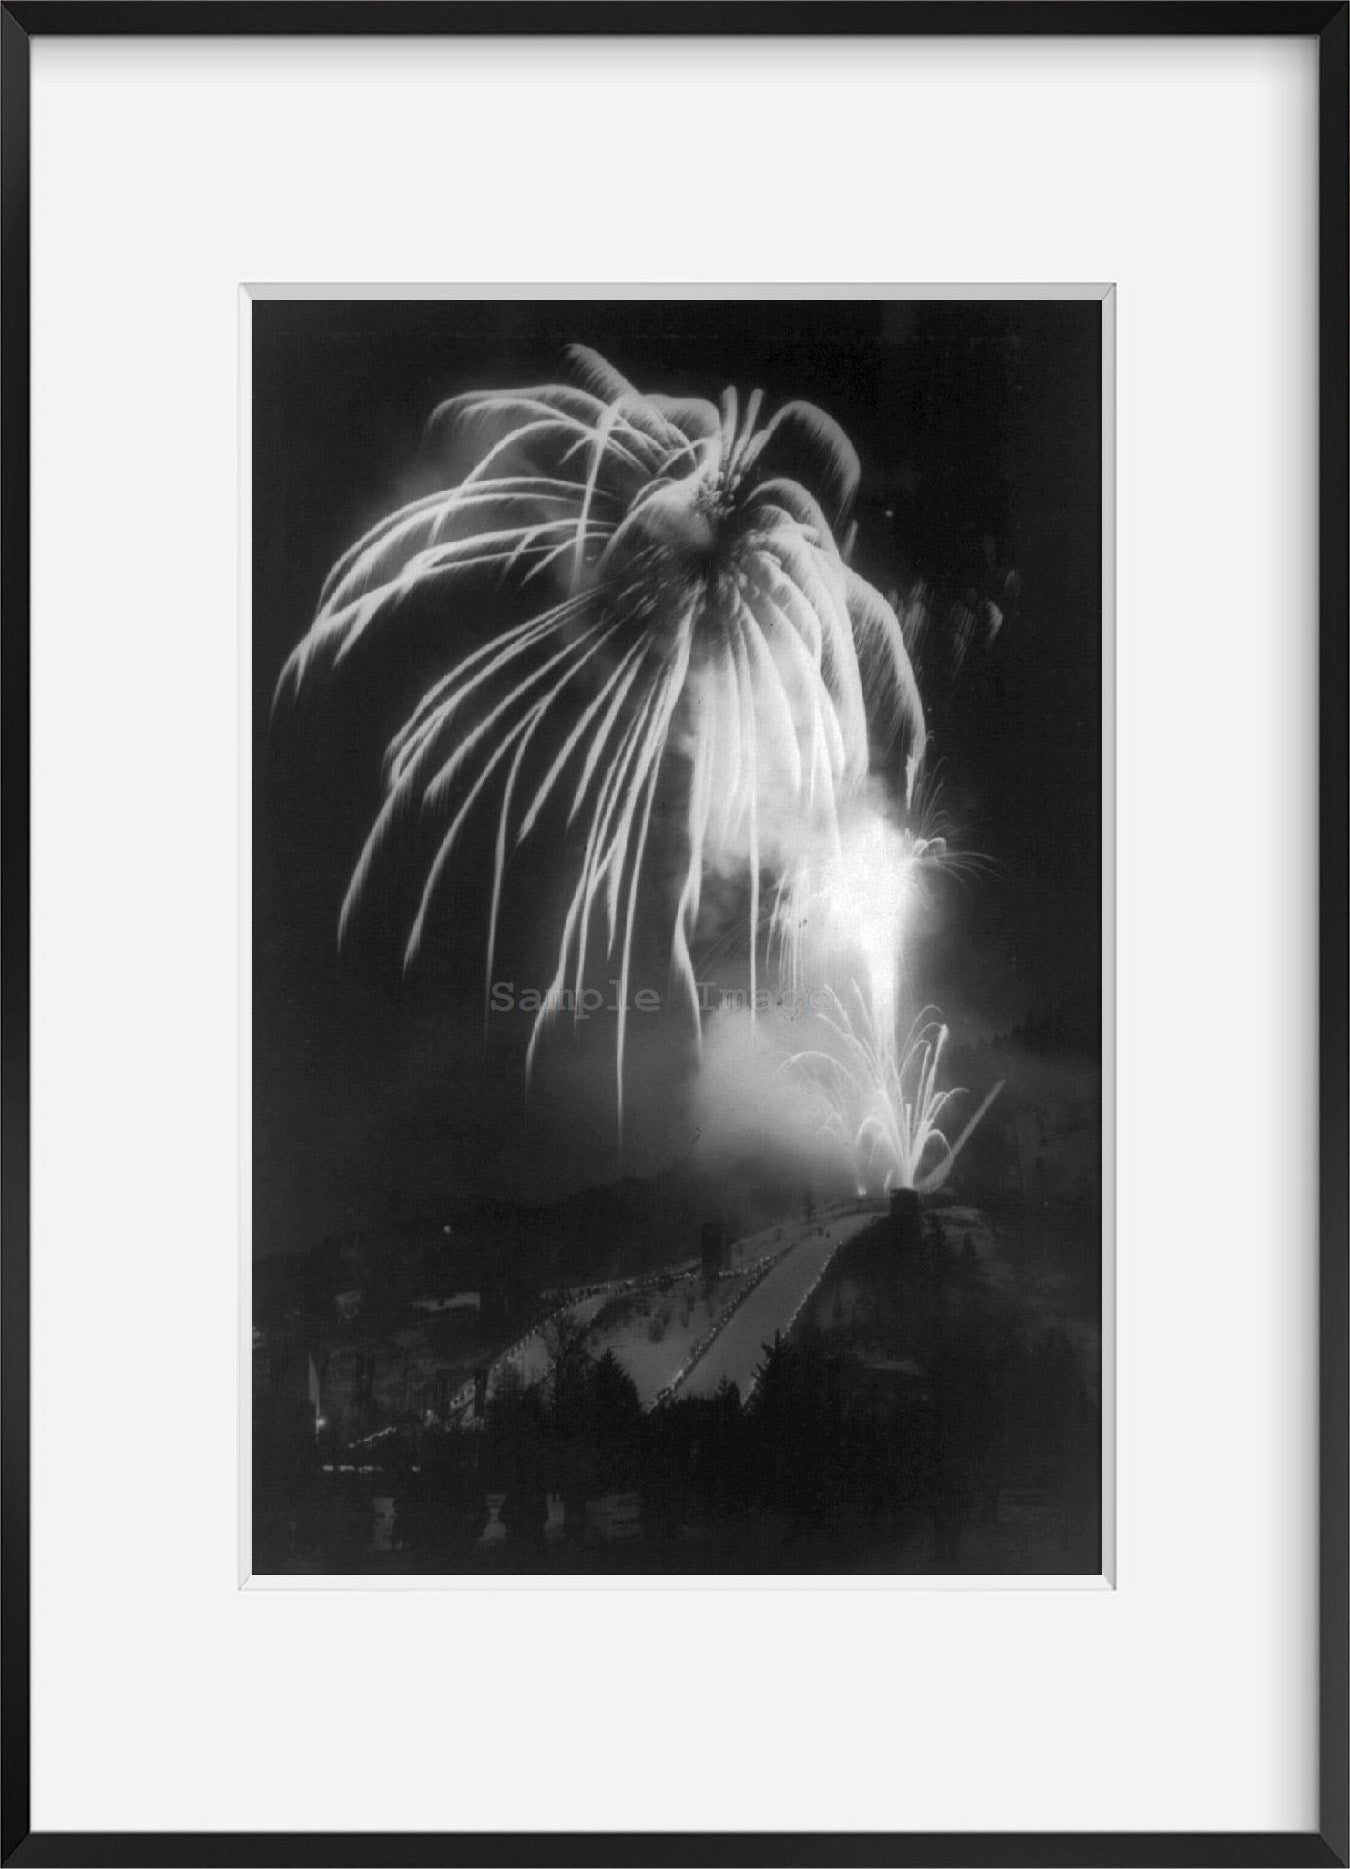 1936 photograph of Winter Olympic games at Garmisch, Germany. 1936: night view -